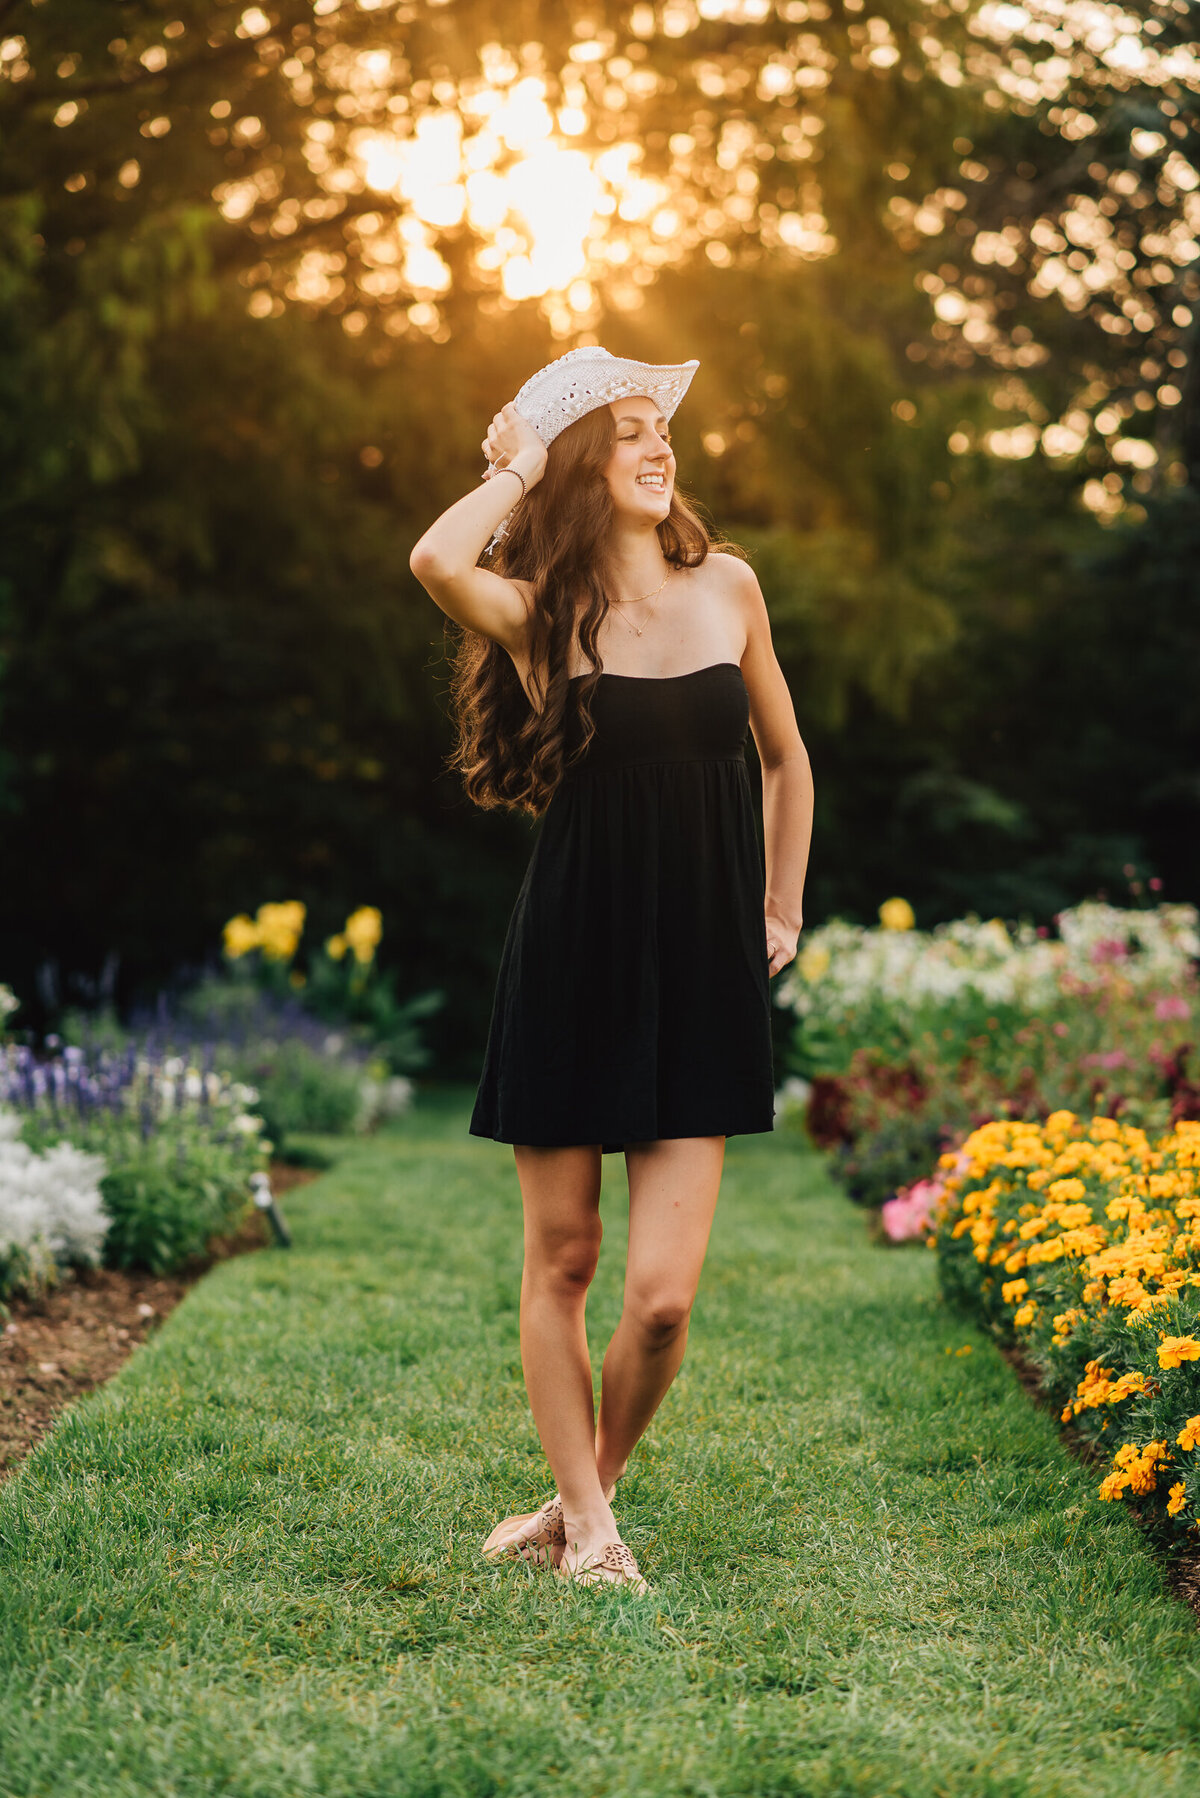 High school senior girl looking up at the sky in black dress with white cowboy hat